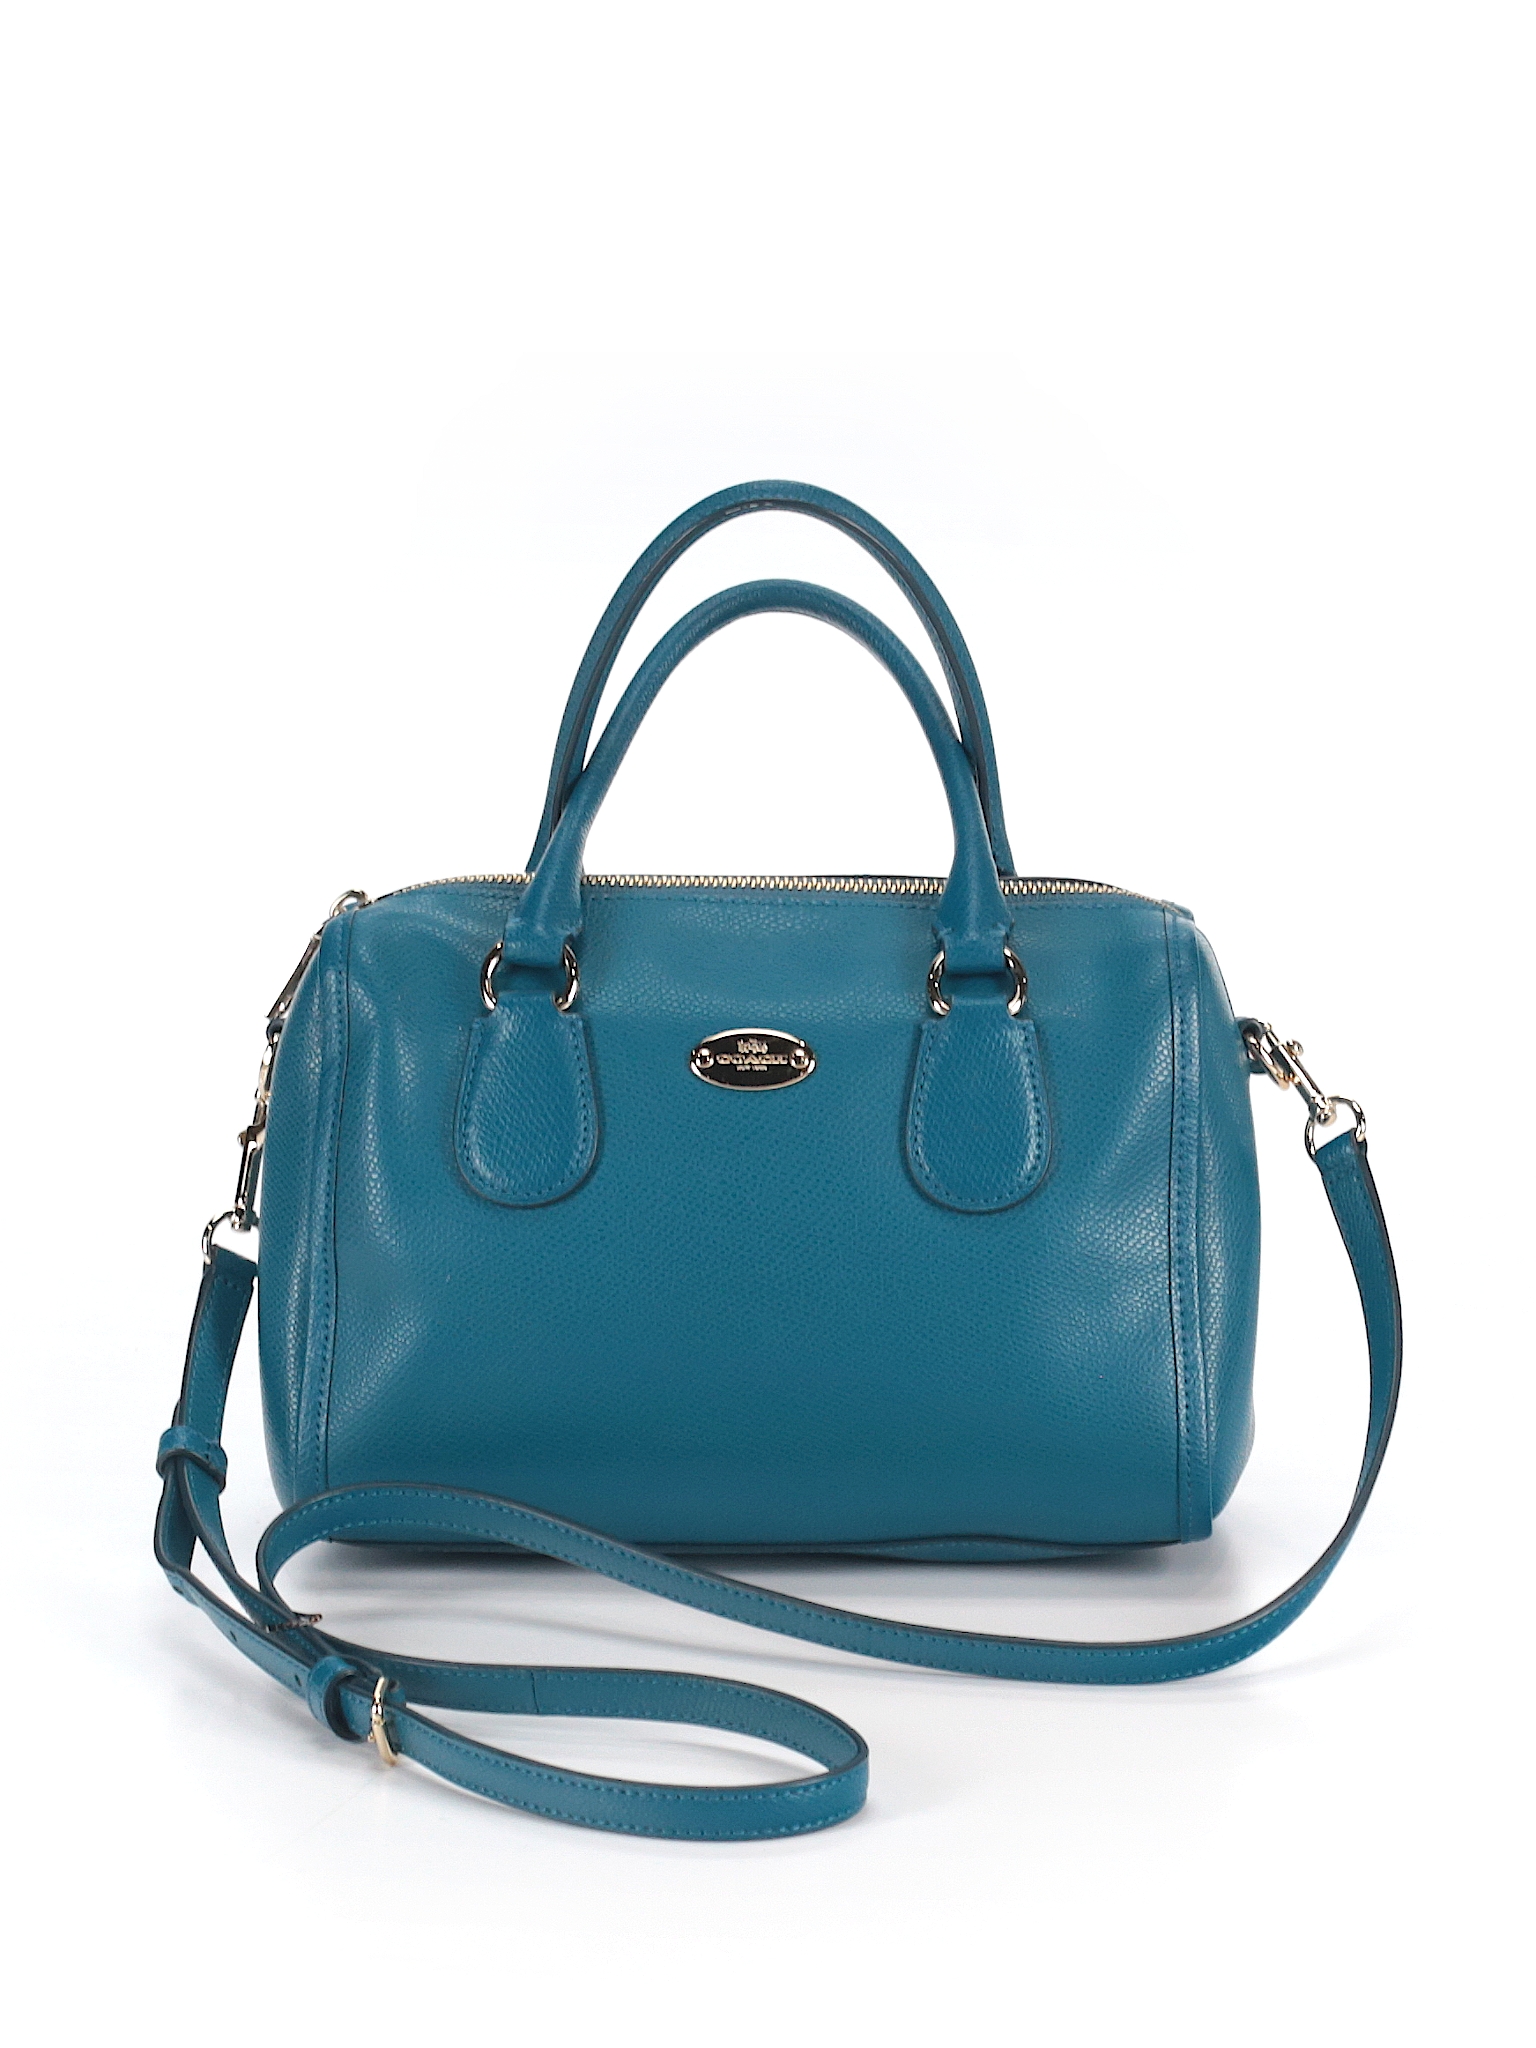 Coach 100% Leather Solid Teal Leather Satchel One Size - 70% off | thredUP